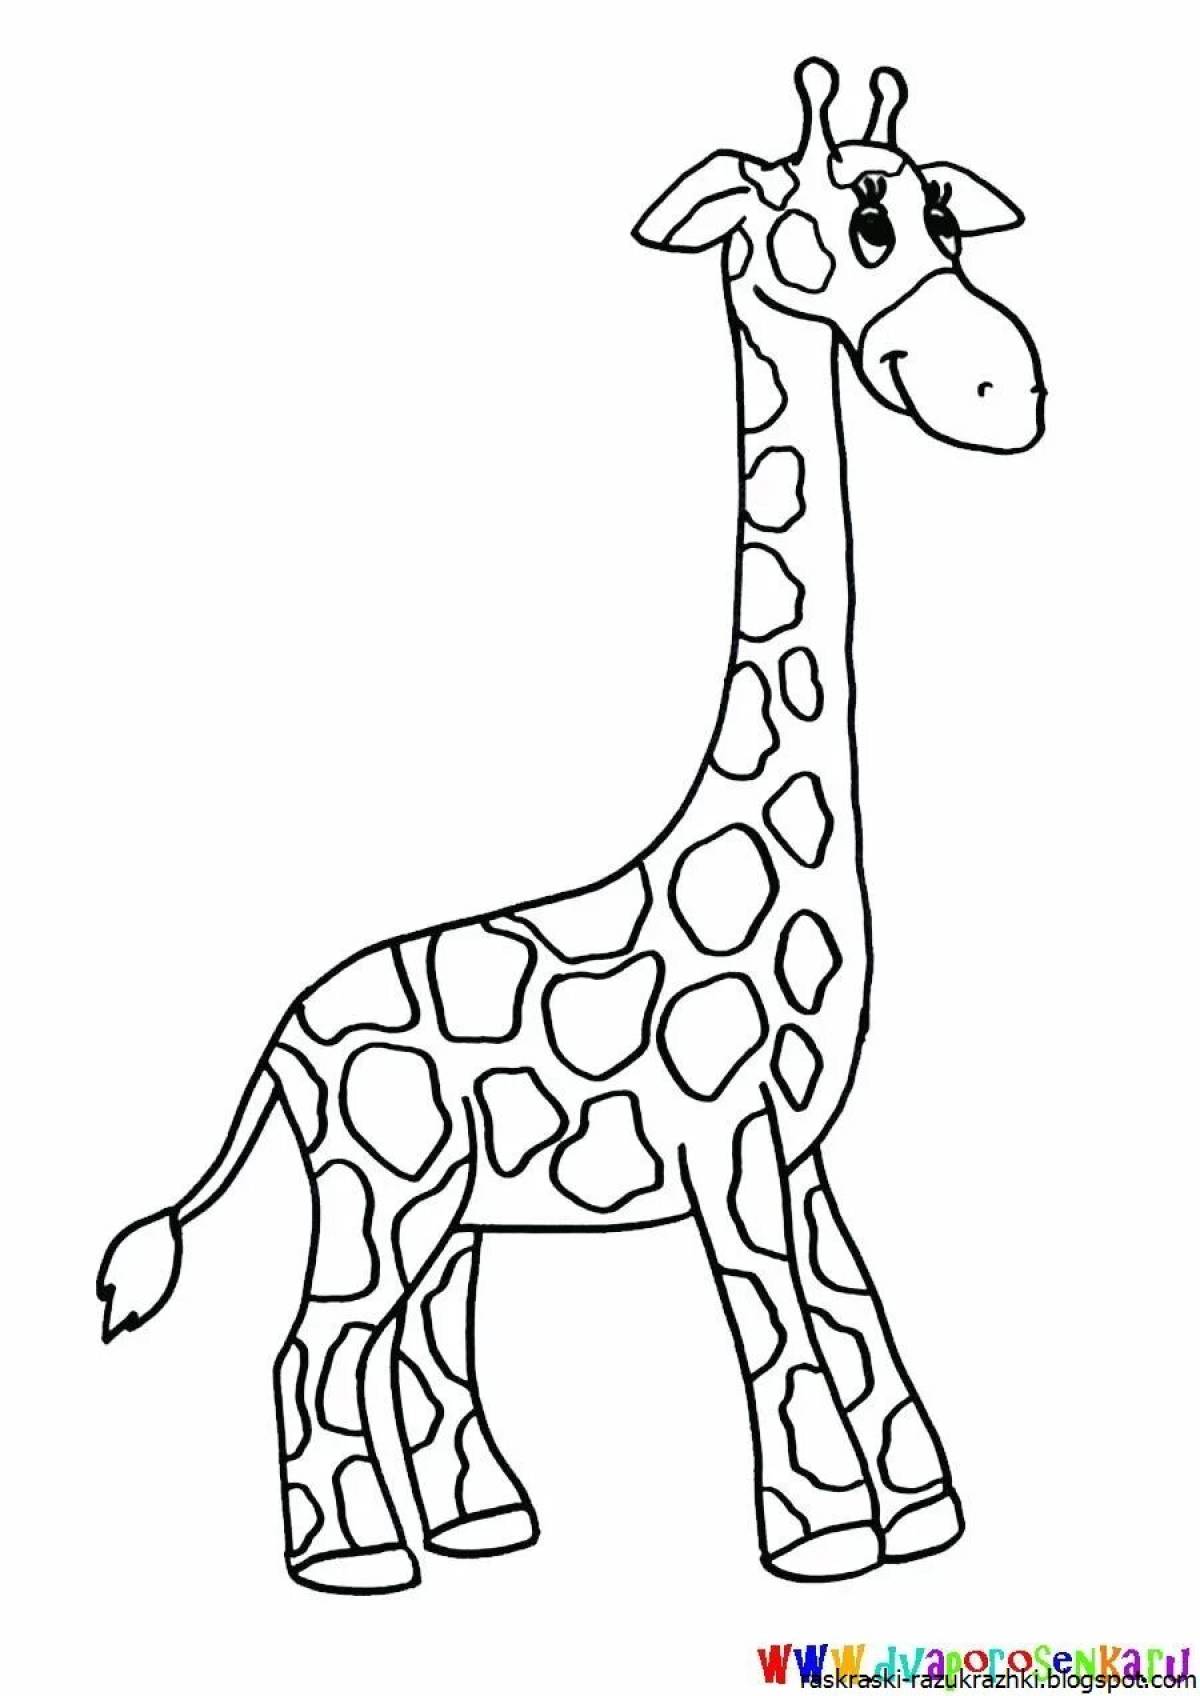 Giraffe live coloring for children 6-7 years old